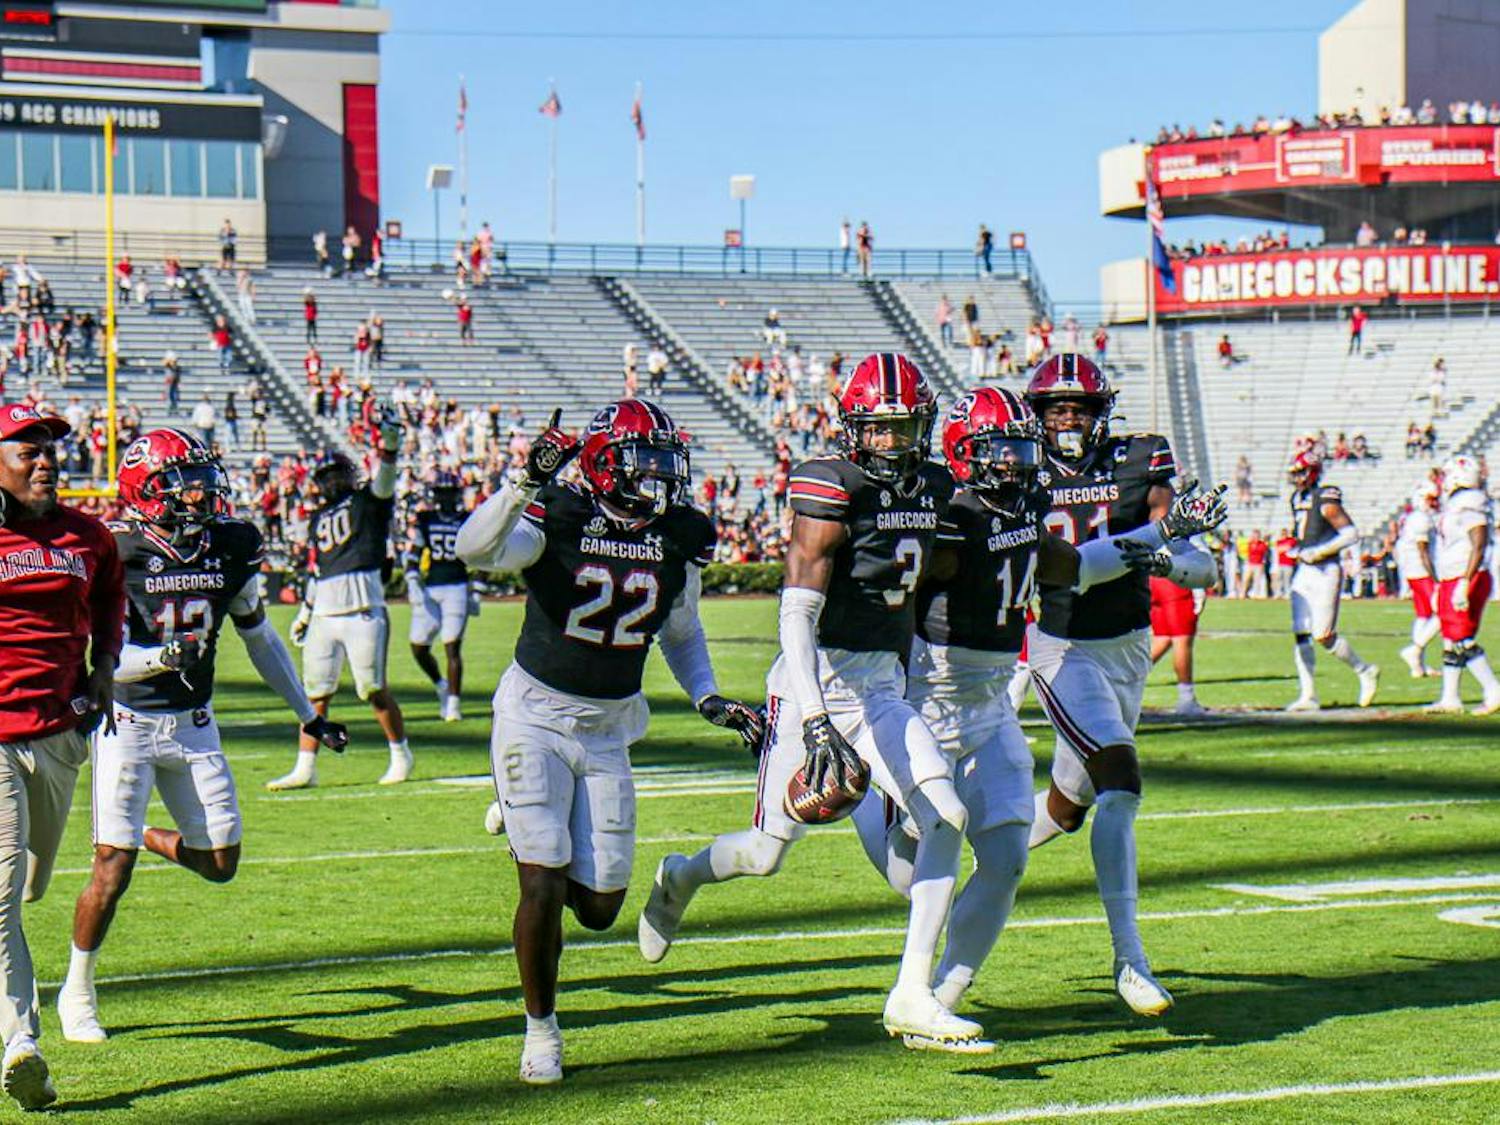 Redshirt junior defensive back O'Donnell Fortune (center) runs to the end zone with several other players after a successful turnover in the fourth quarter of the matchup between the South Carolina and Jacksonville State Gamecocks on Nov. 4, 2023. The overturn helped South Carolina win the game against Jacksonville State.